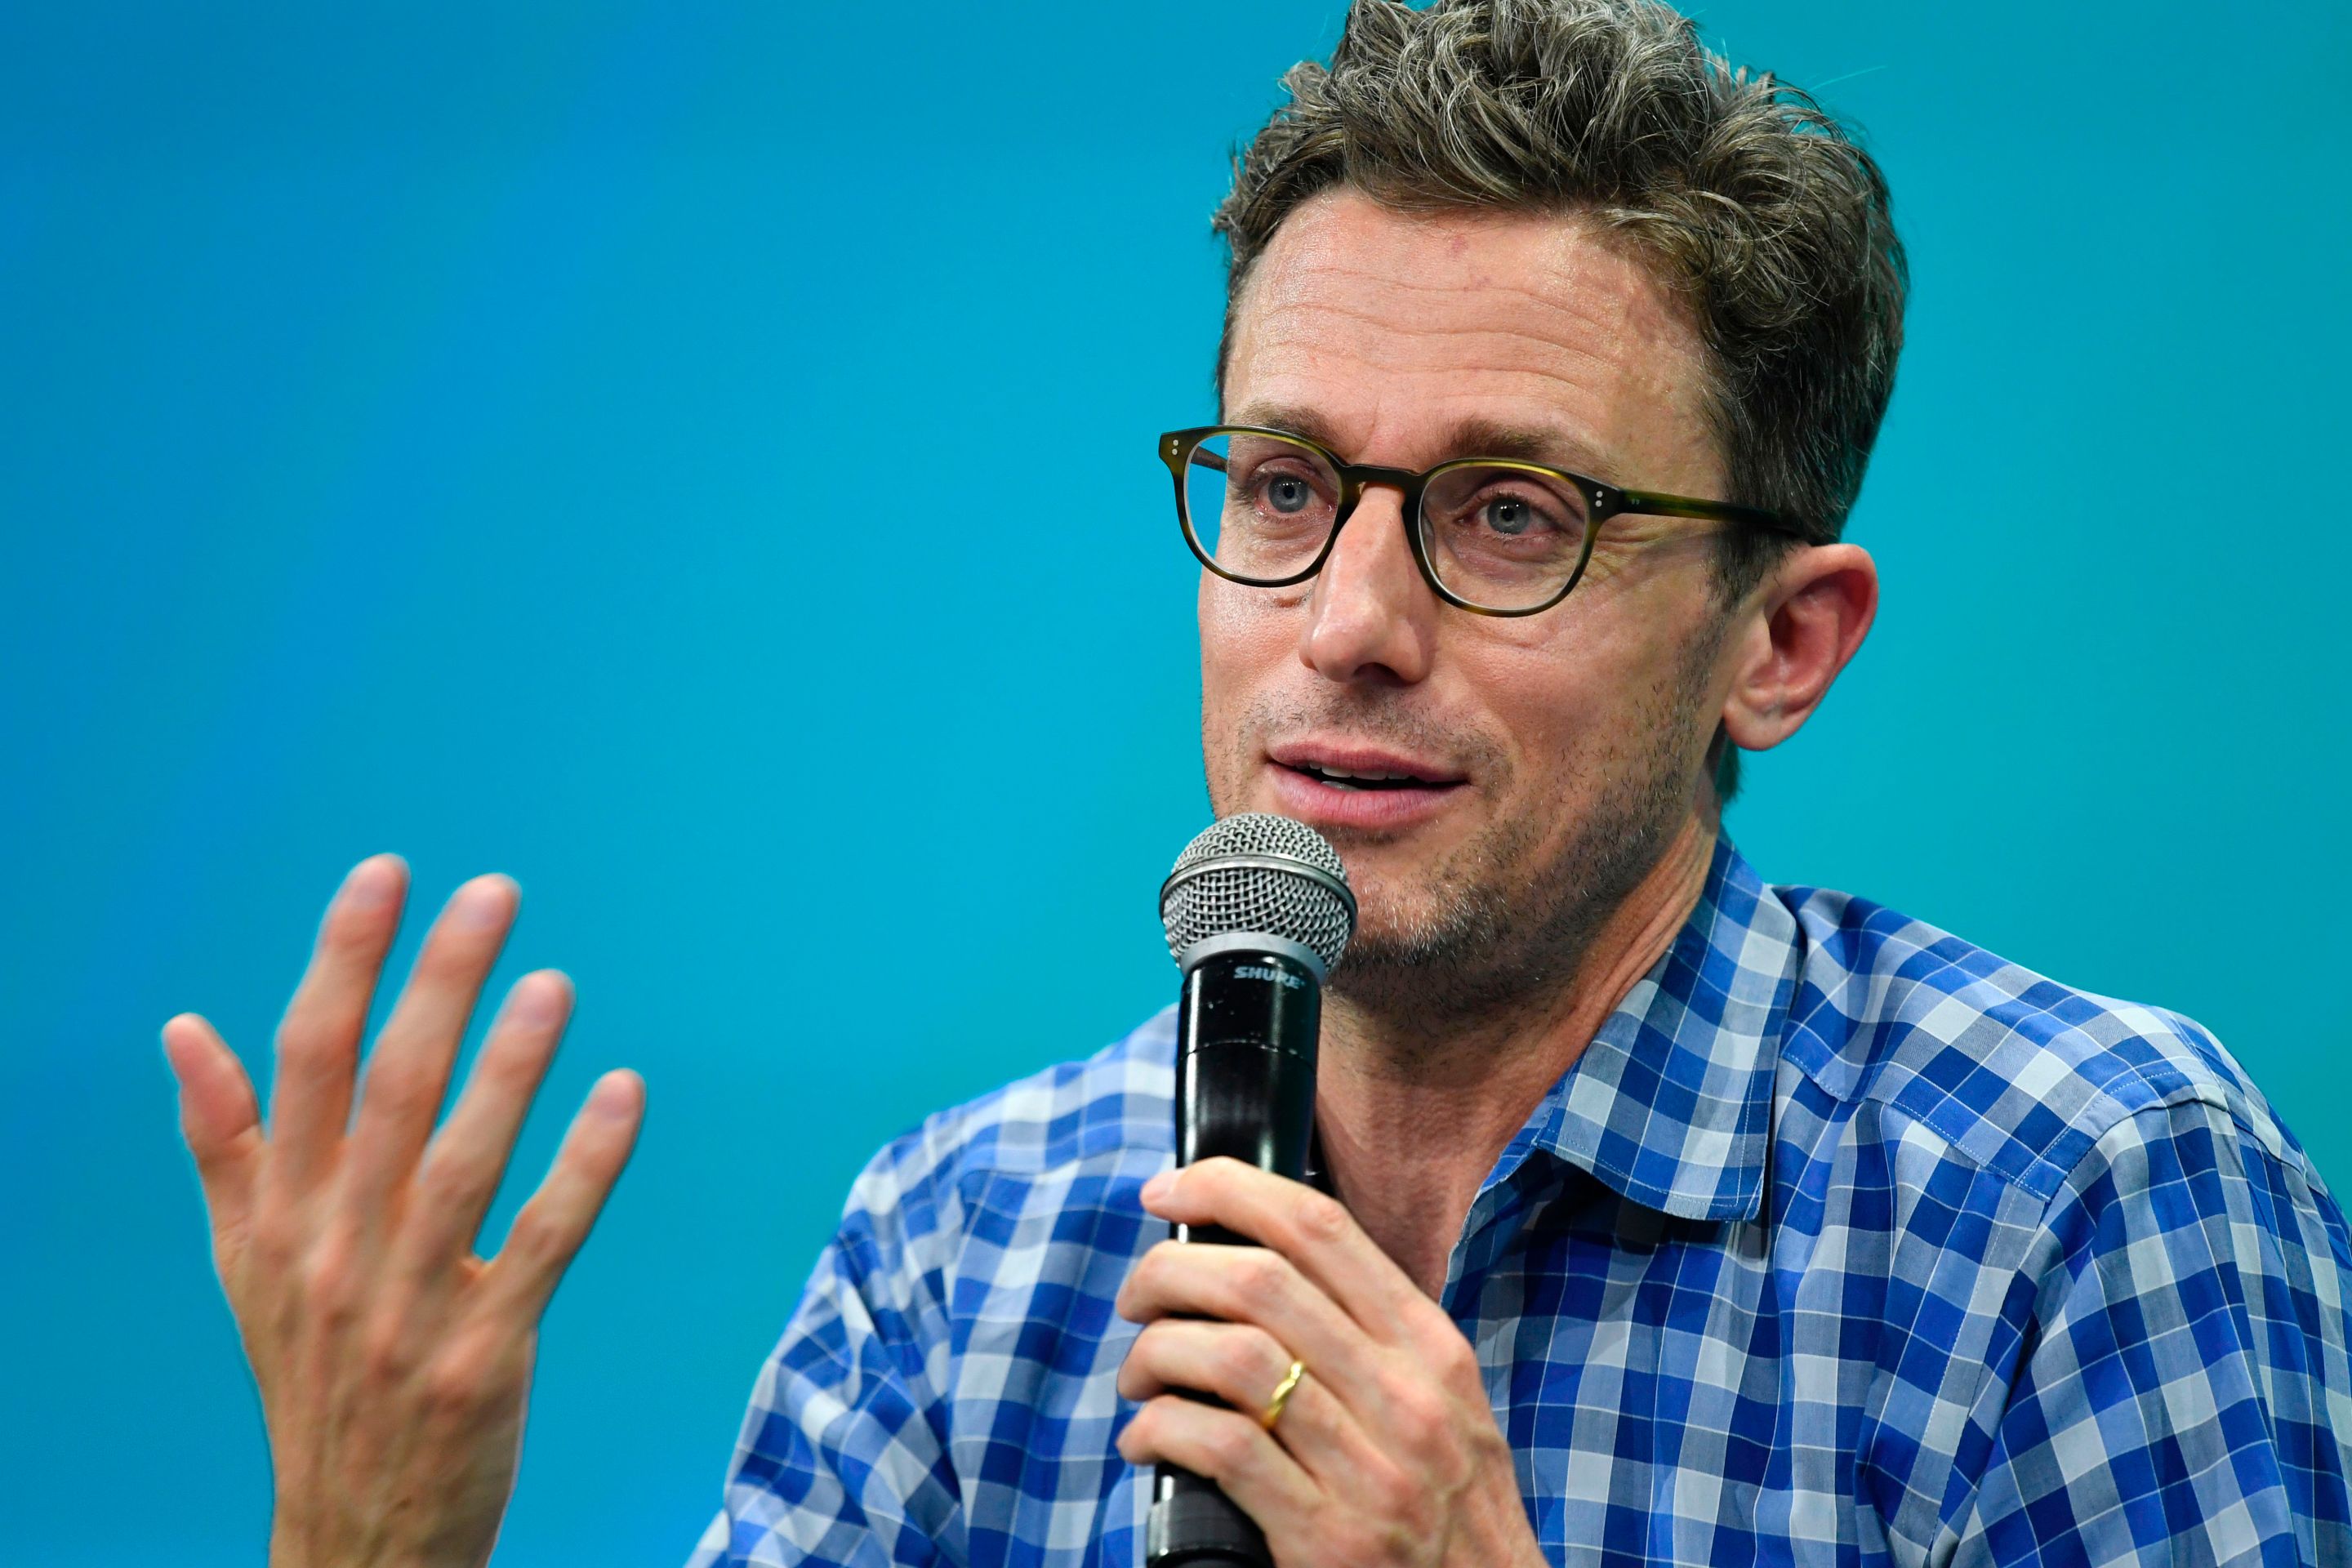 Founder and Chief Executive Officer (CEO) Buzzfeed Jonah Peretti gestures as he speaks during a session at The Viva Technology Event in Paris on June 15, 2017. / AFP PHOTO / BERTRAND GUAY